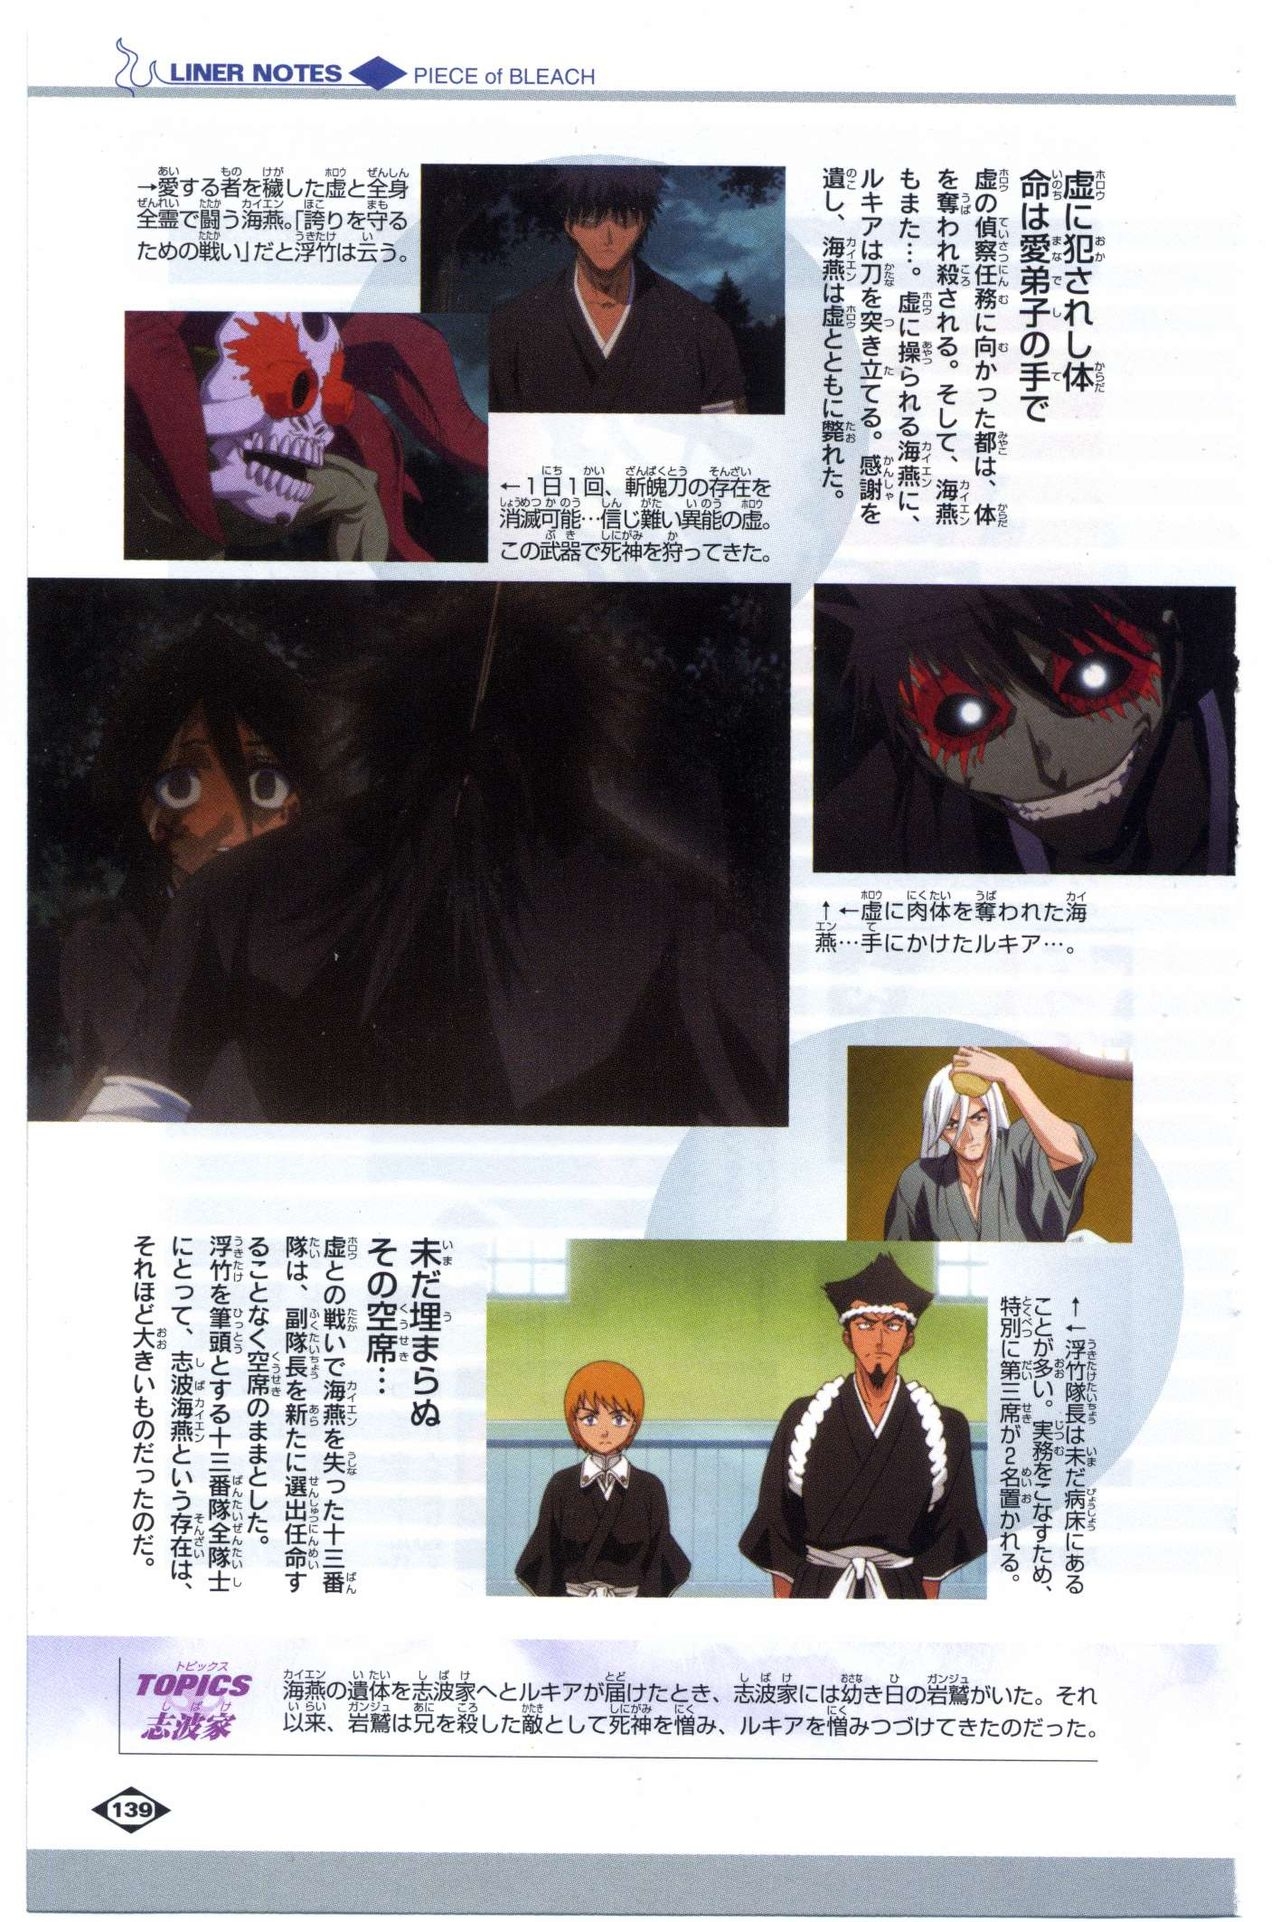 Bleach: Official Animation Book VIBEs 139